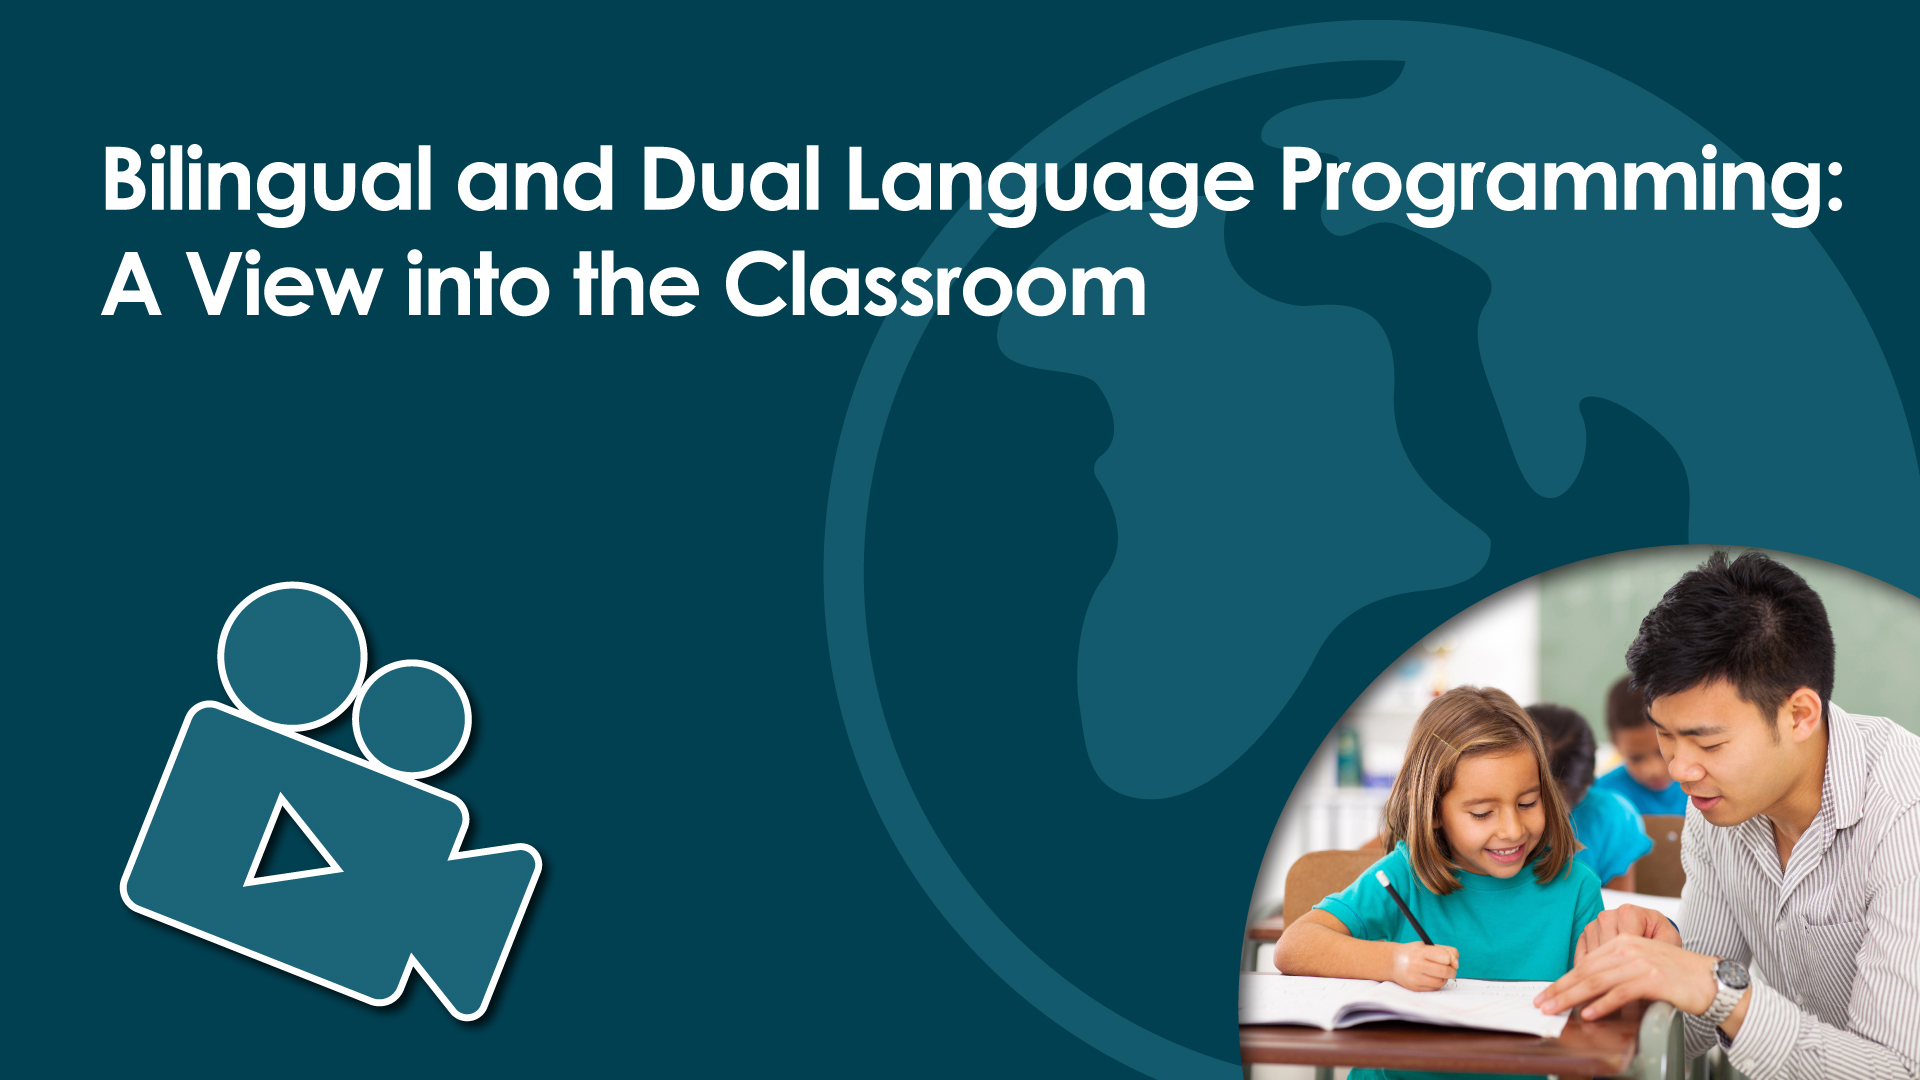 Bilingual and Dual Language Programming – A View into the Classroom